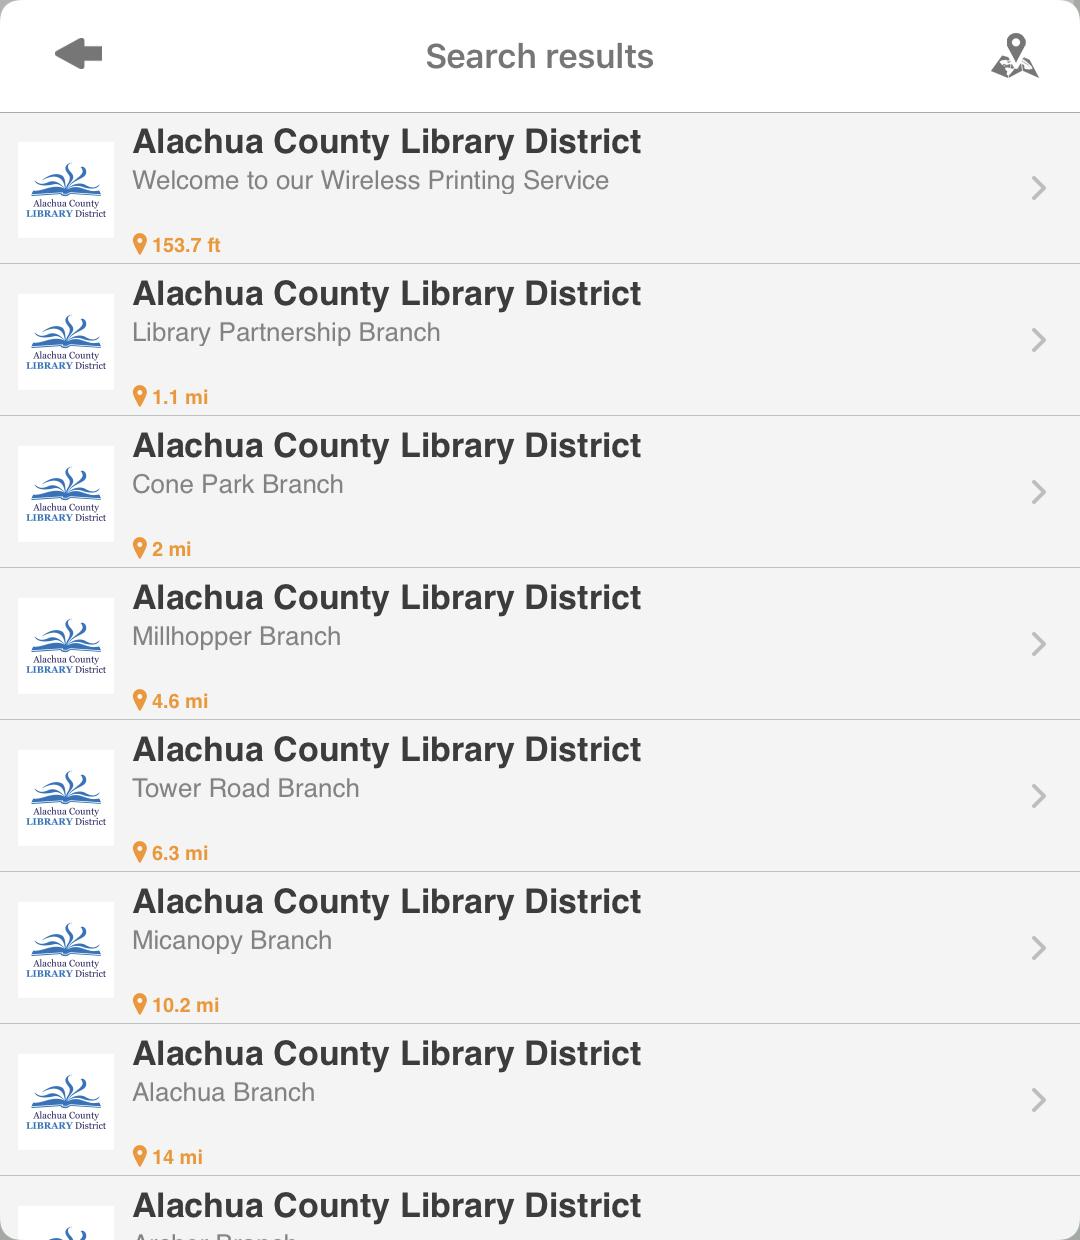 Select branch of Alachua County Library District